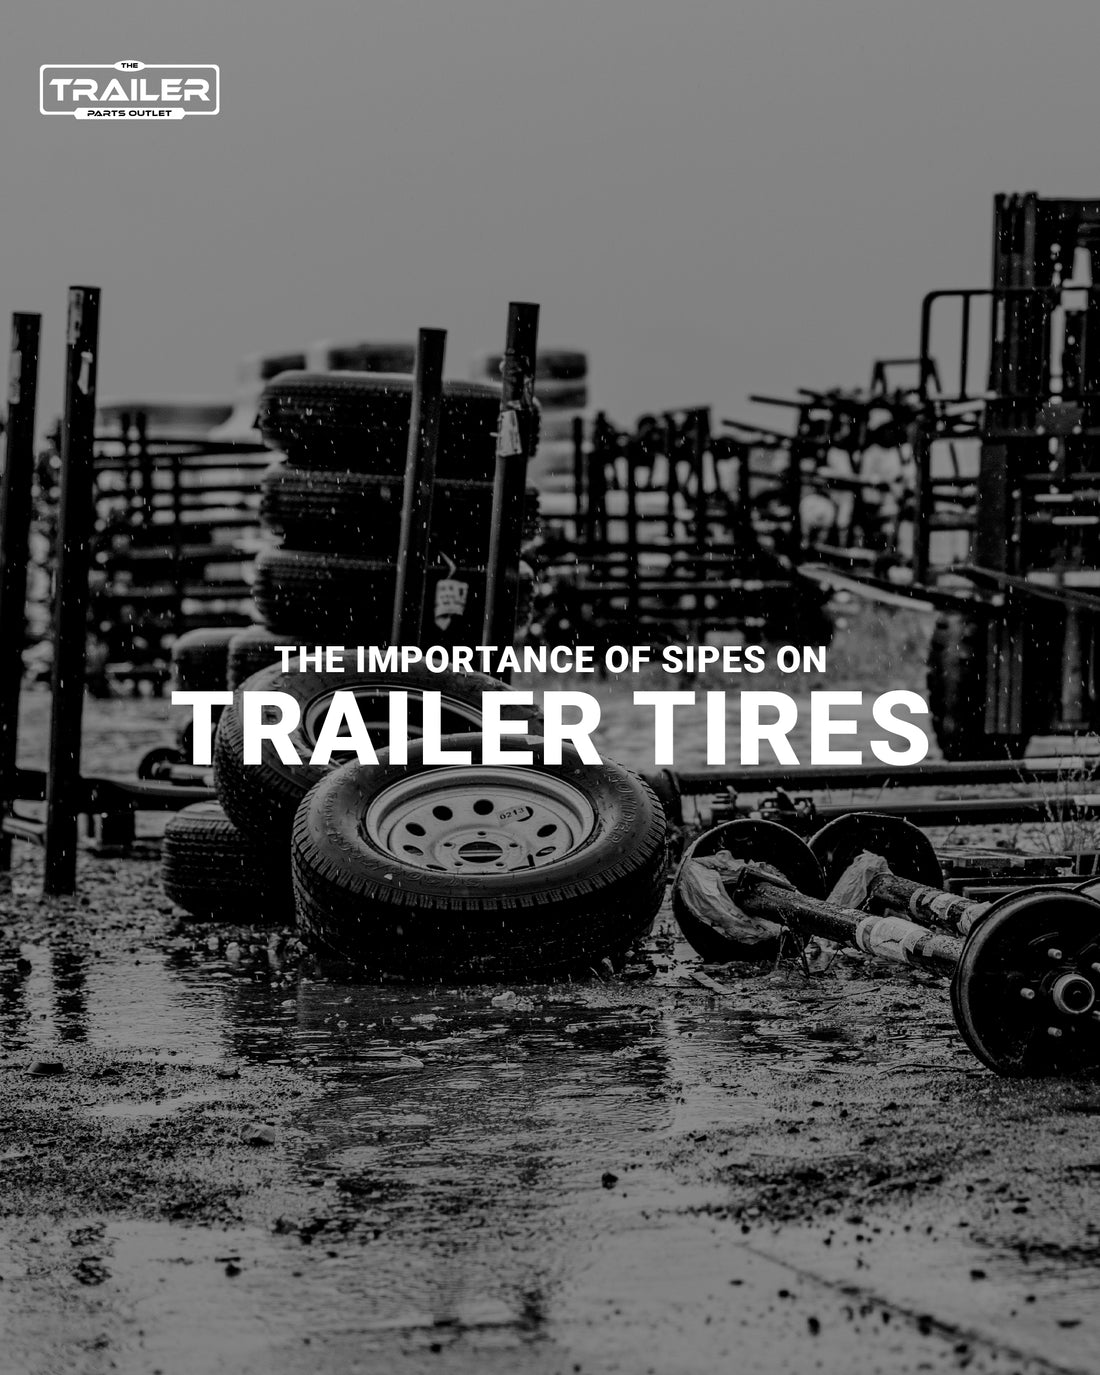 The Importance of Sipes on Trailer Tires